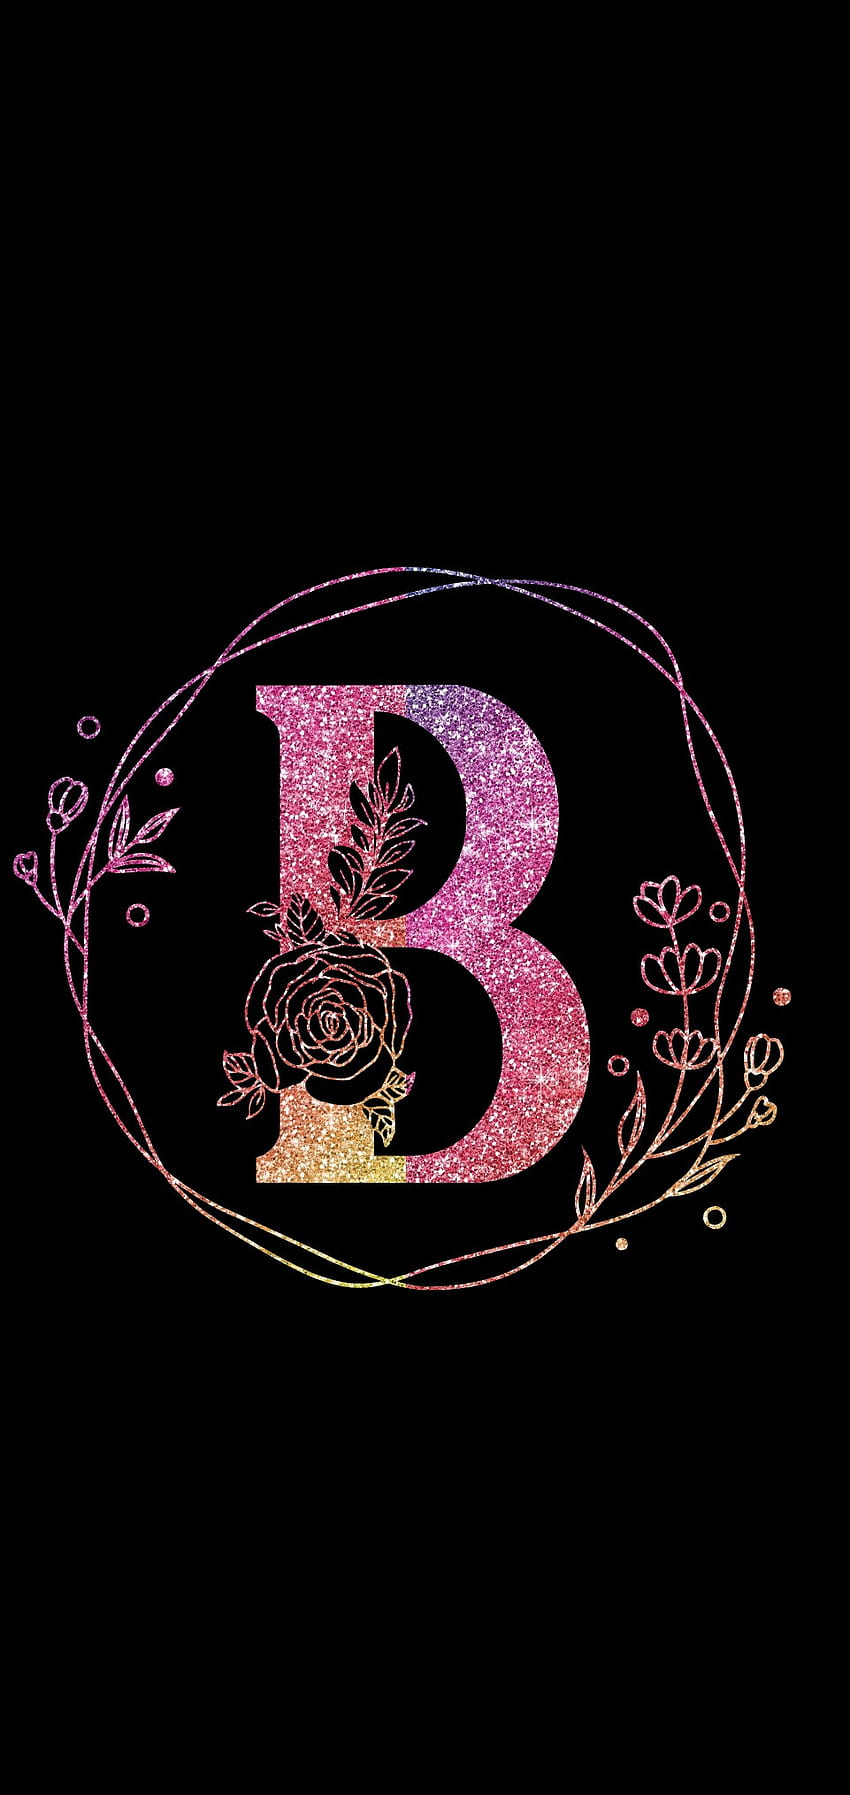 Letter b Images and Stock Photos. 49,271 Letter b photography and royalty  free pictures available to download from thousands of stock photo providers.